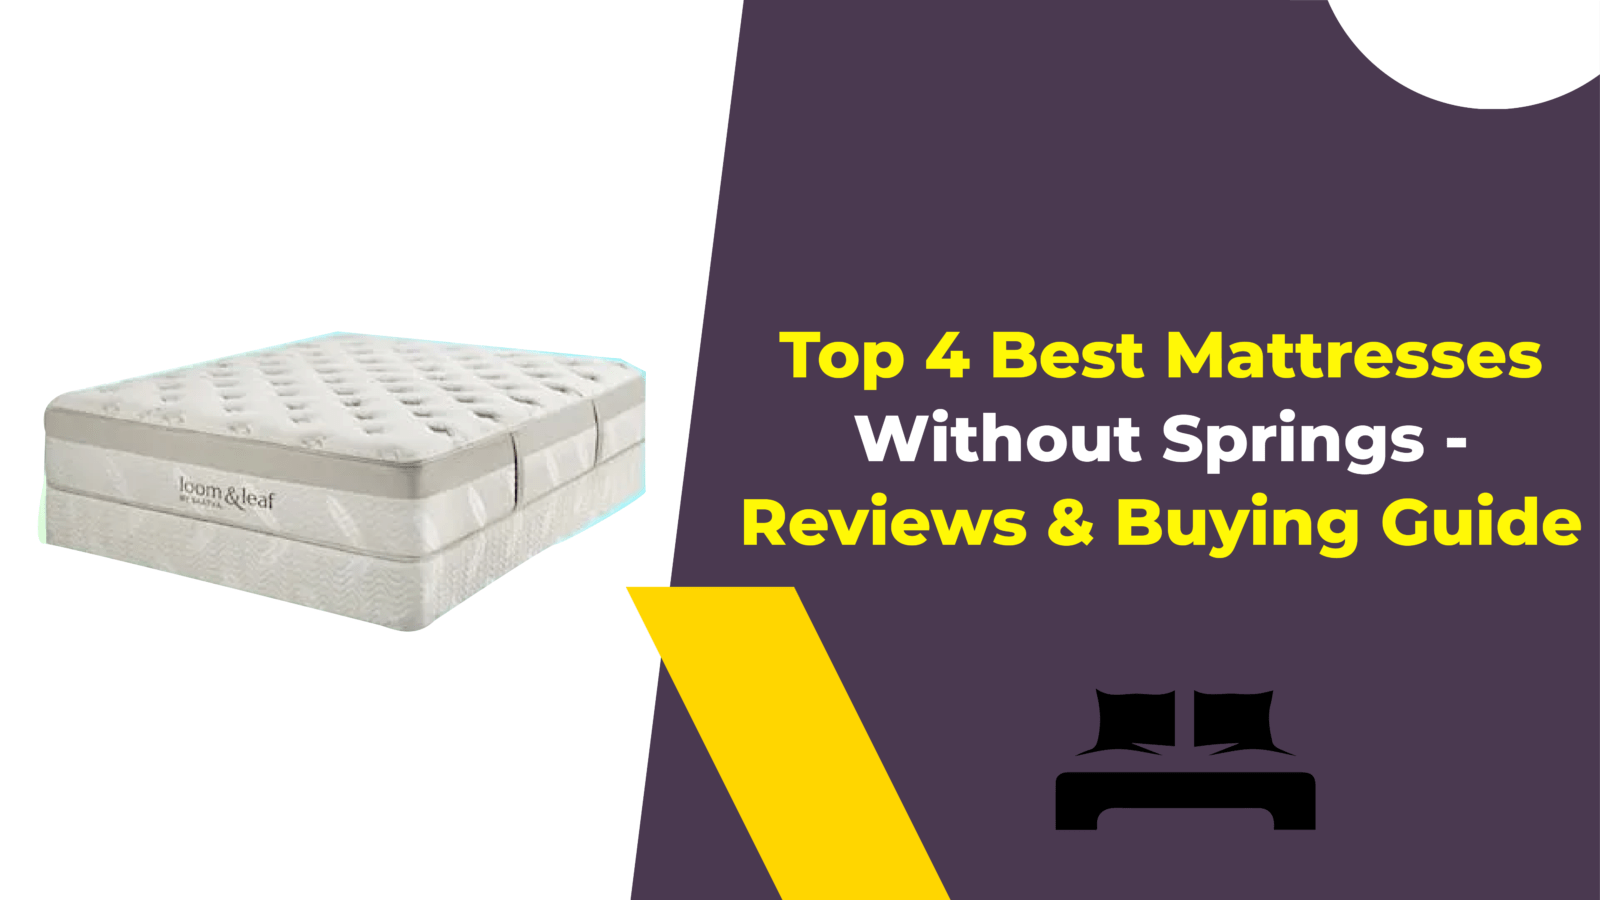 are mattresses comfortable without box springs